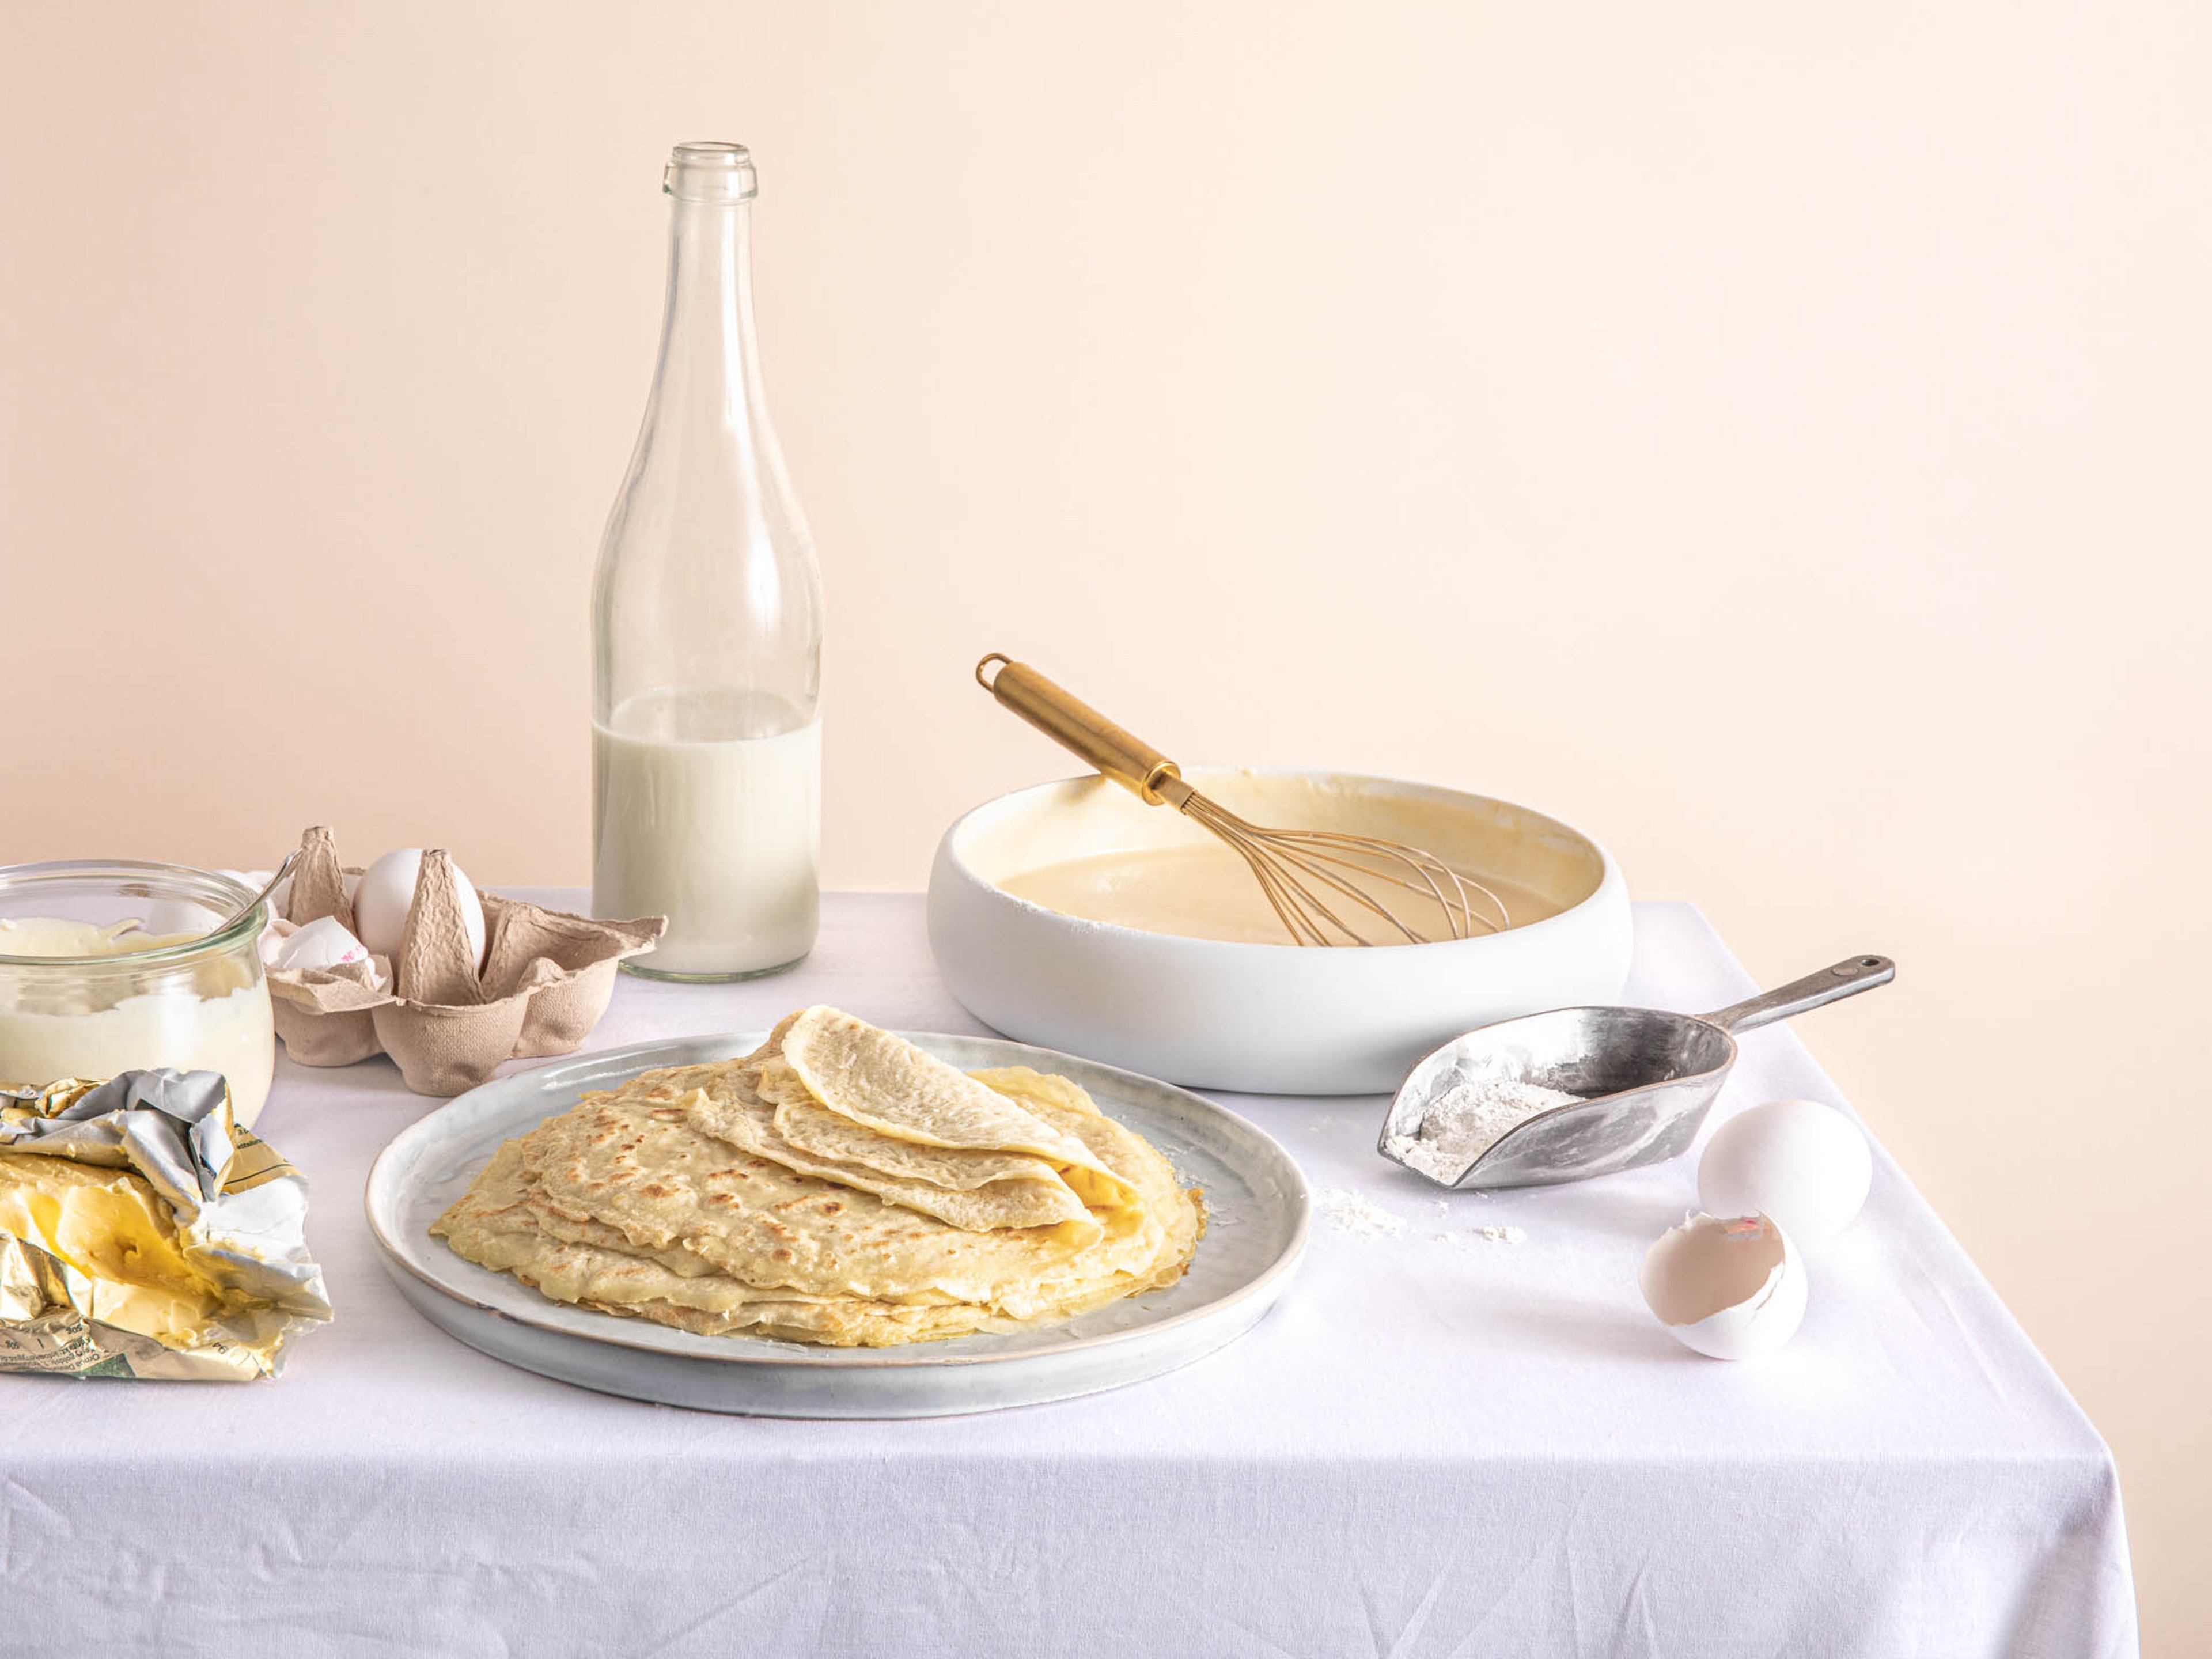 How to Make Crêpes at Home